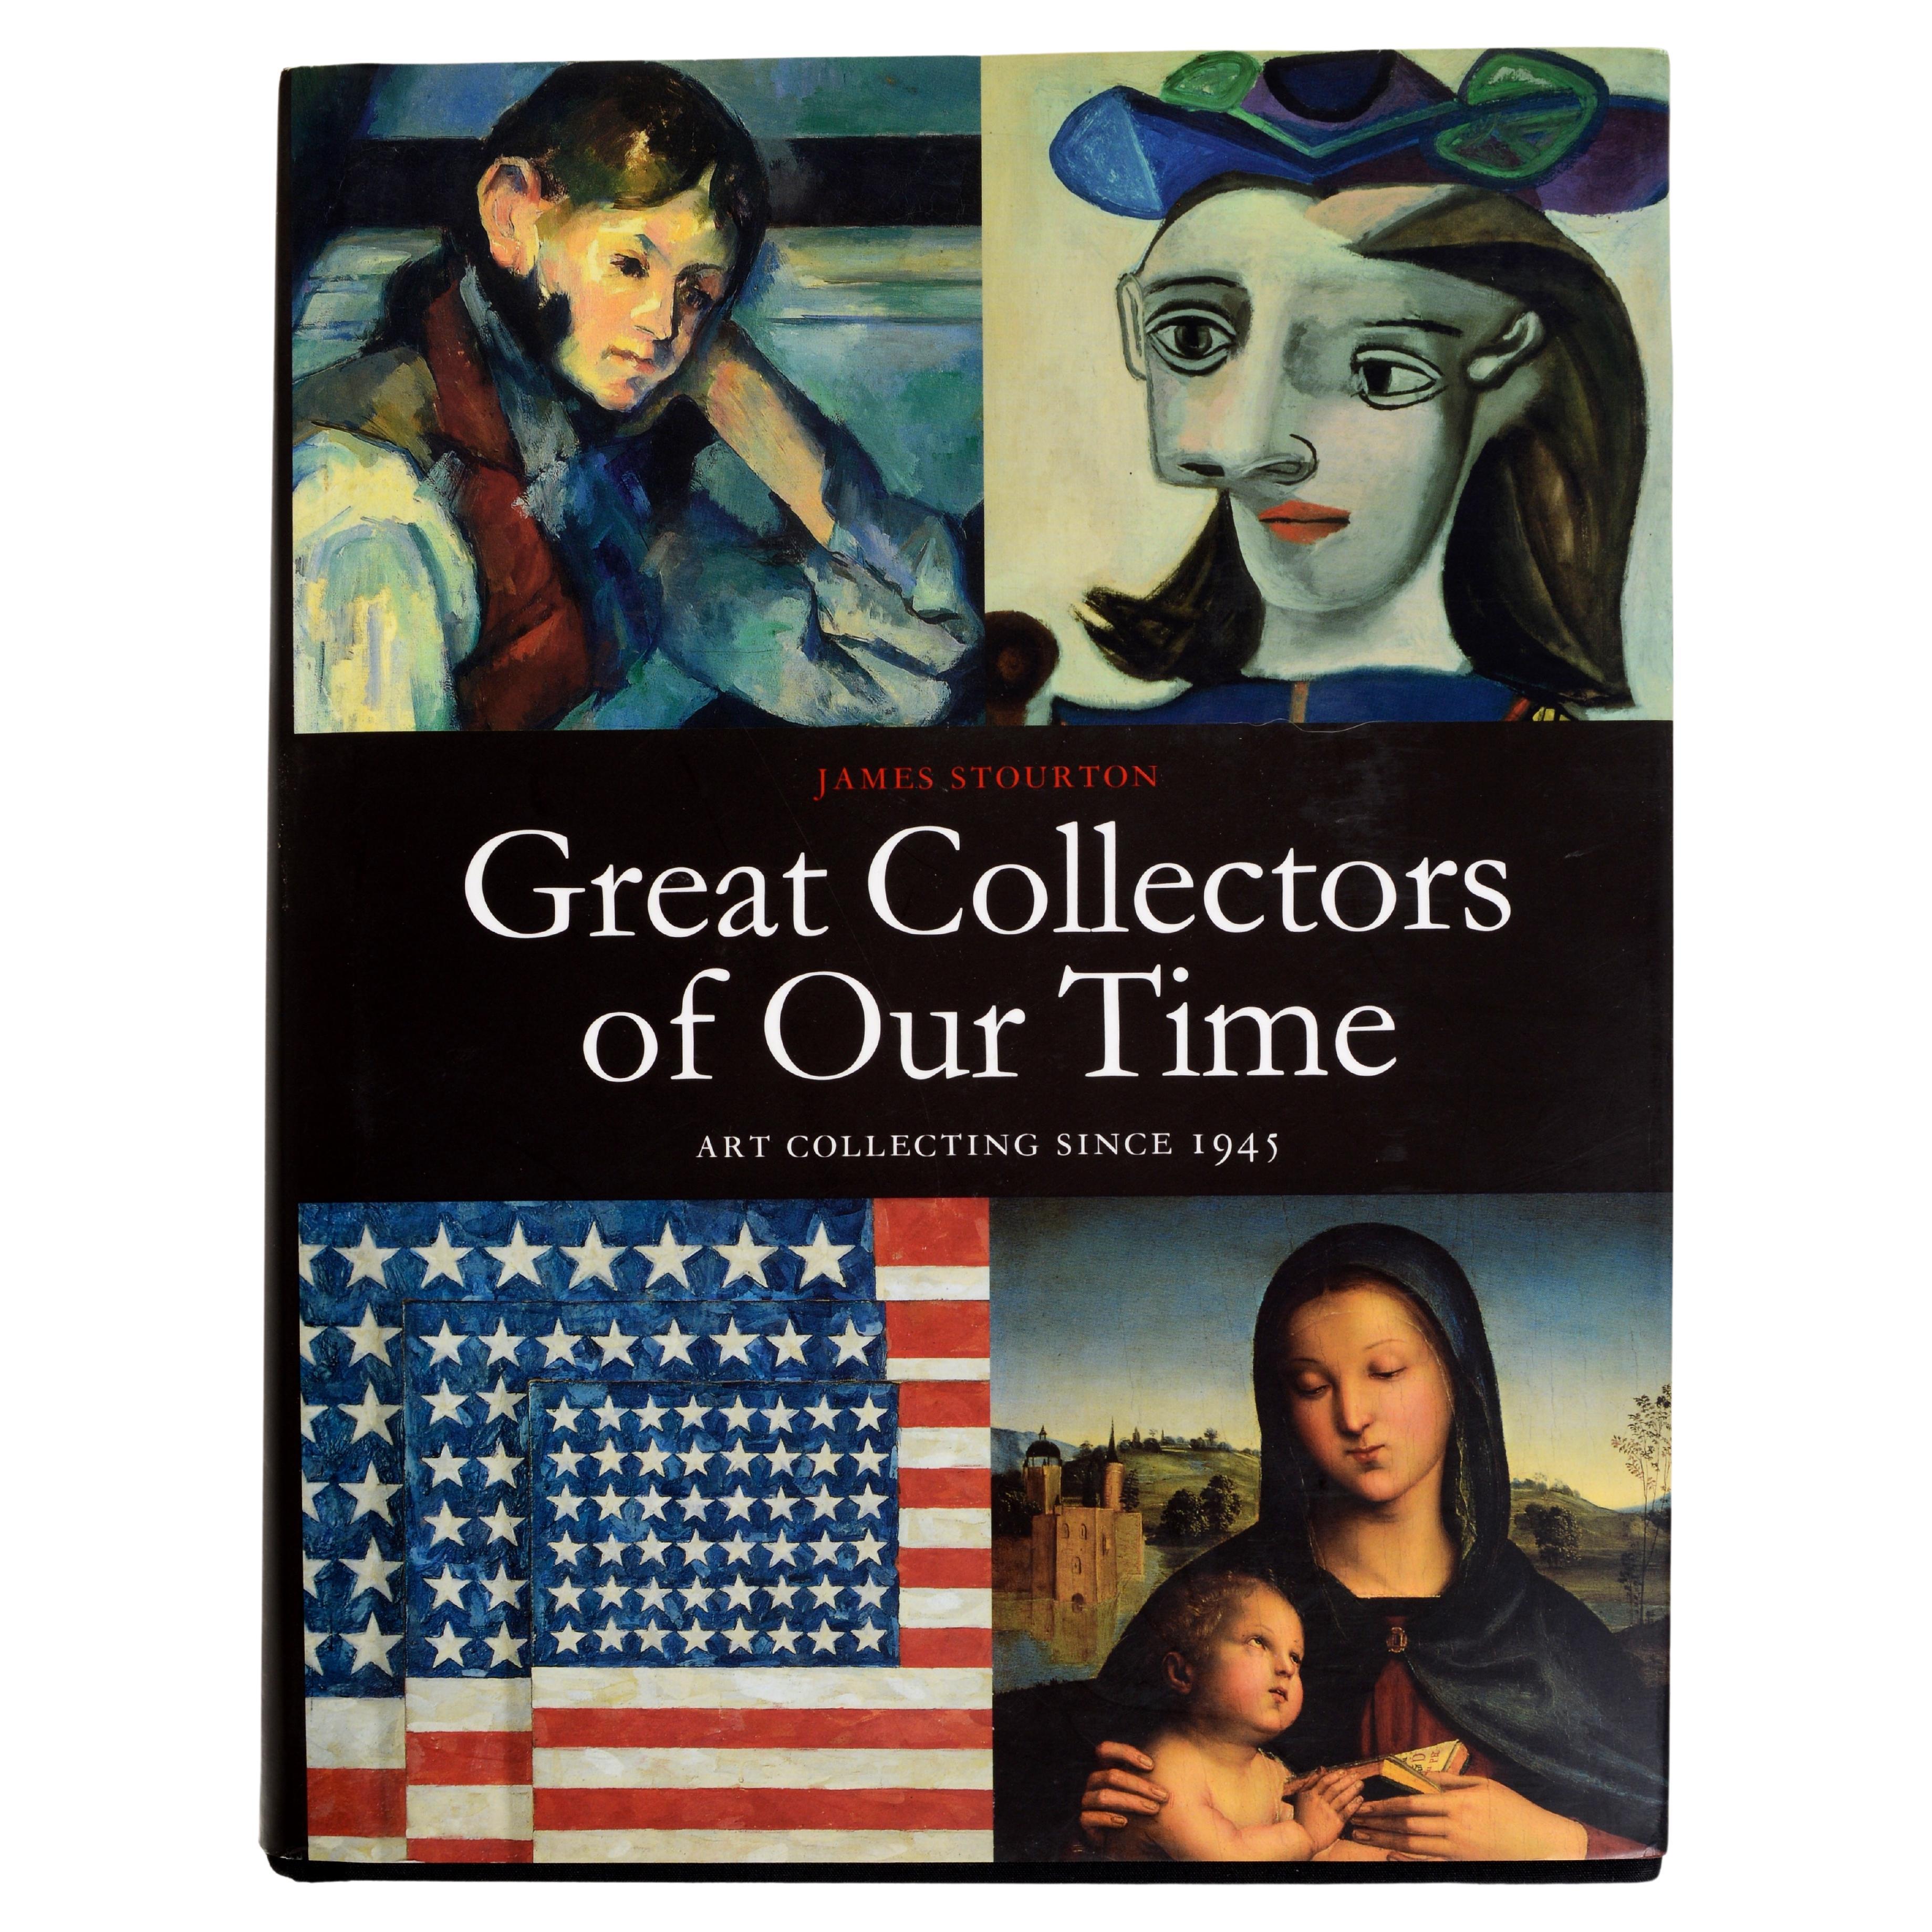 Great Collectors of Our Time: Art Collecting Since 1945 by James Stourton